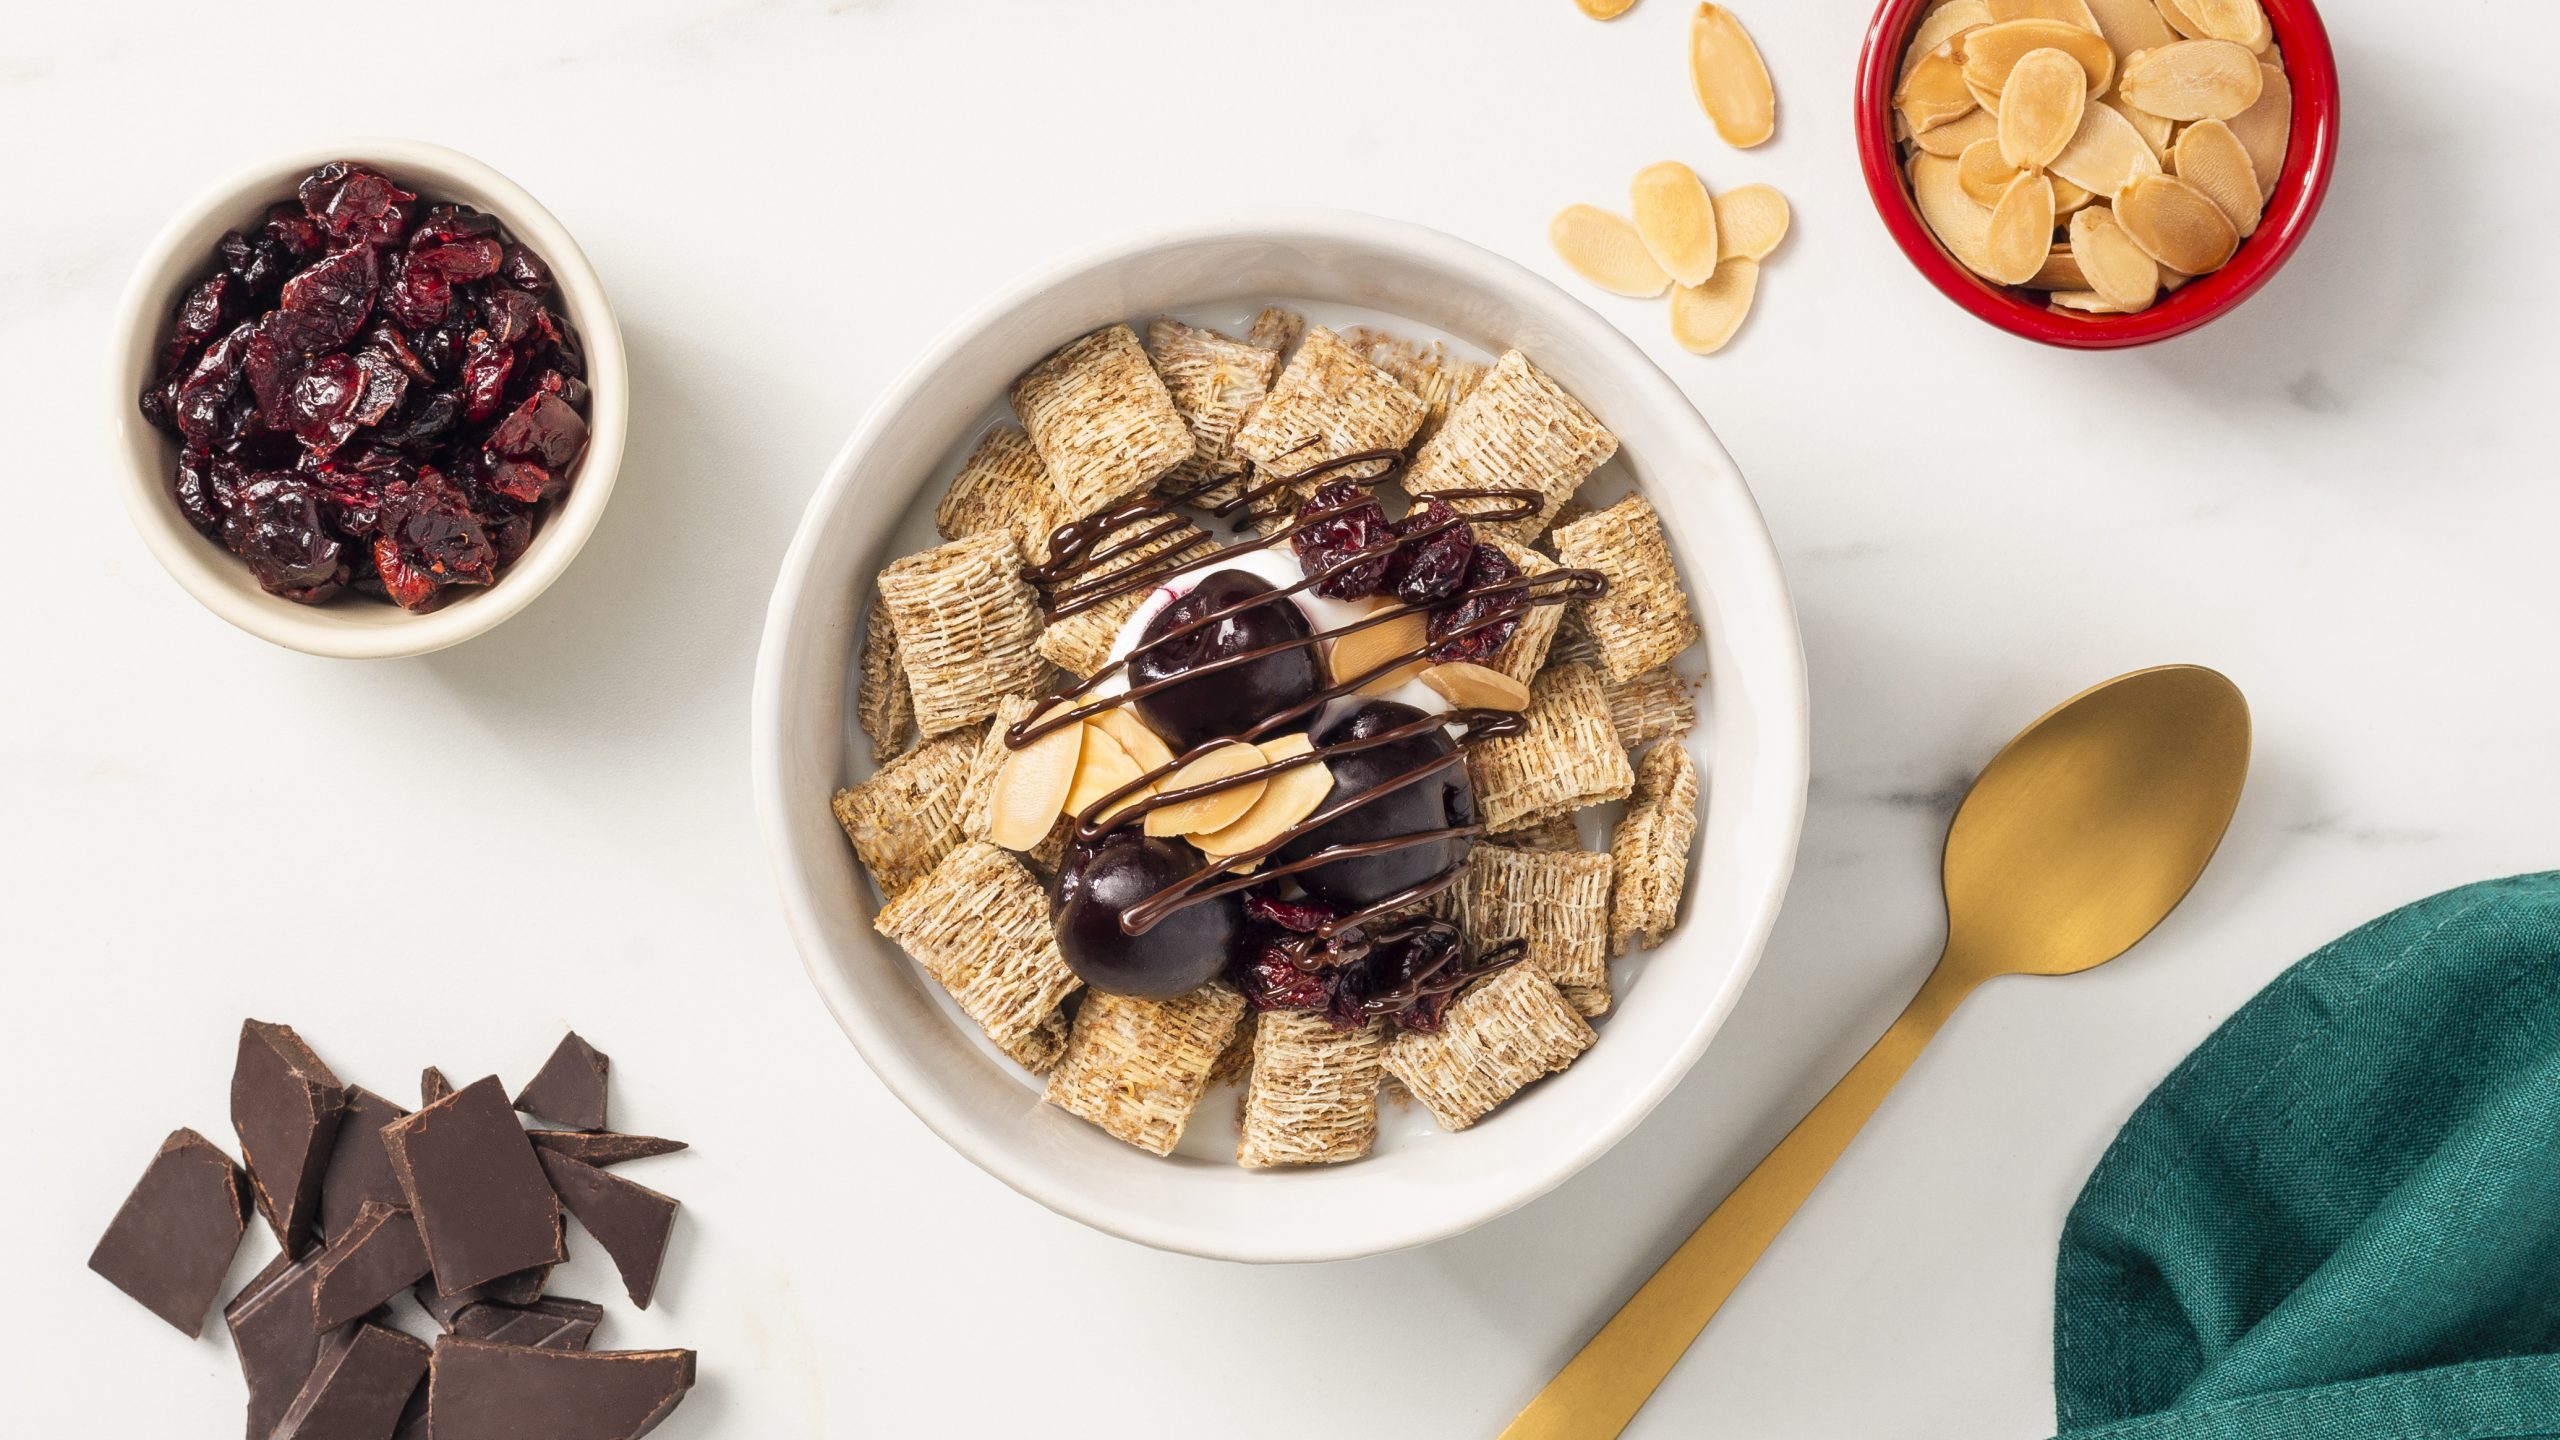 Spoon Sized Shredded Wheat in a bowl with cherries, yogurt and chocolate drizzle on top.